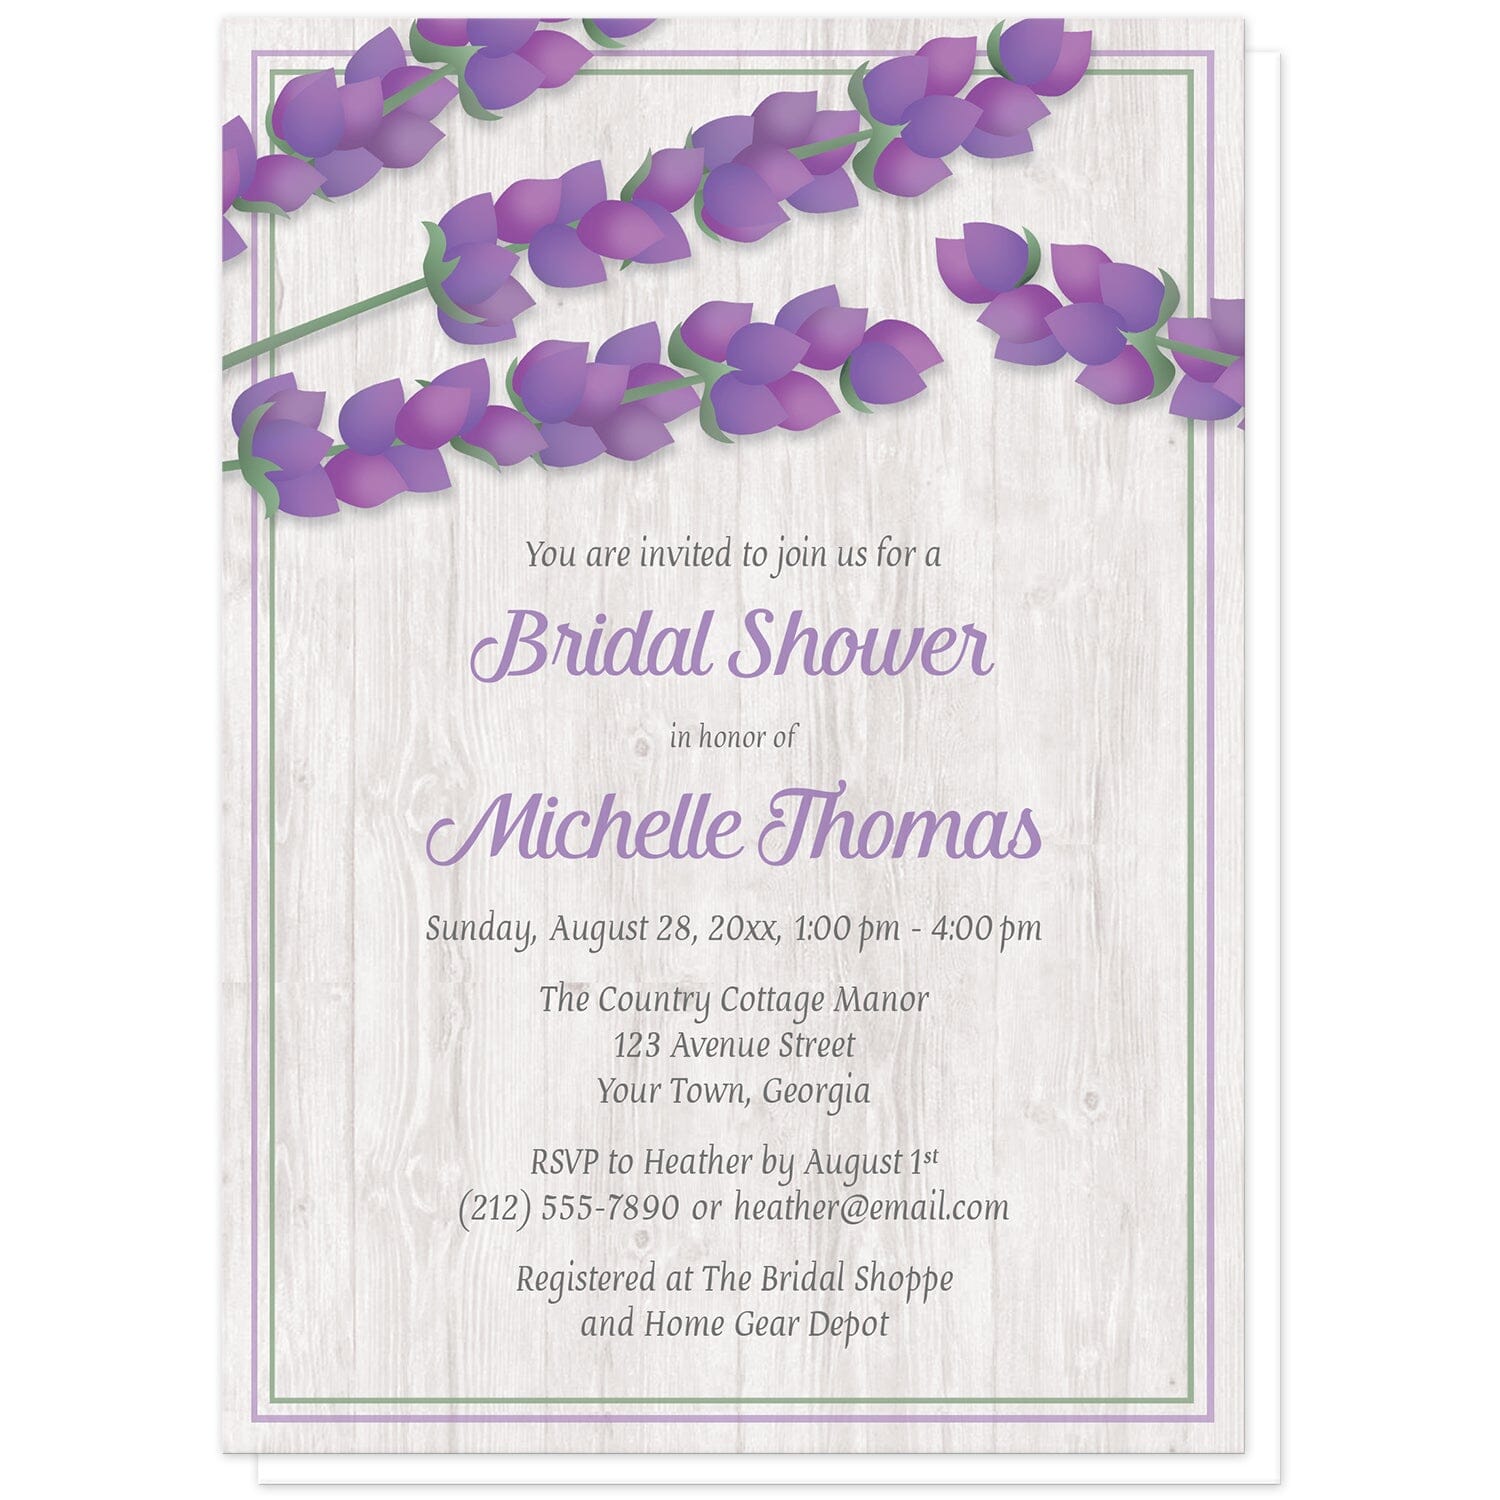 Whitewashed Wood Lavender Bridal Shower Invitations at Artistically Invited. Lovely whitewashed wood lavender bridal shower invitations with a rustic chic design featuring illustrated purple lavender stems along the top over a light whitewashed wood background illustration outlined with purple and green. Your personalized bridal shower celebration details are custom printed in purple and gray over the whitewashed wood below the lavender.